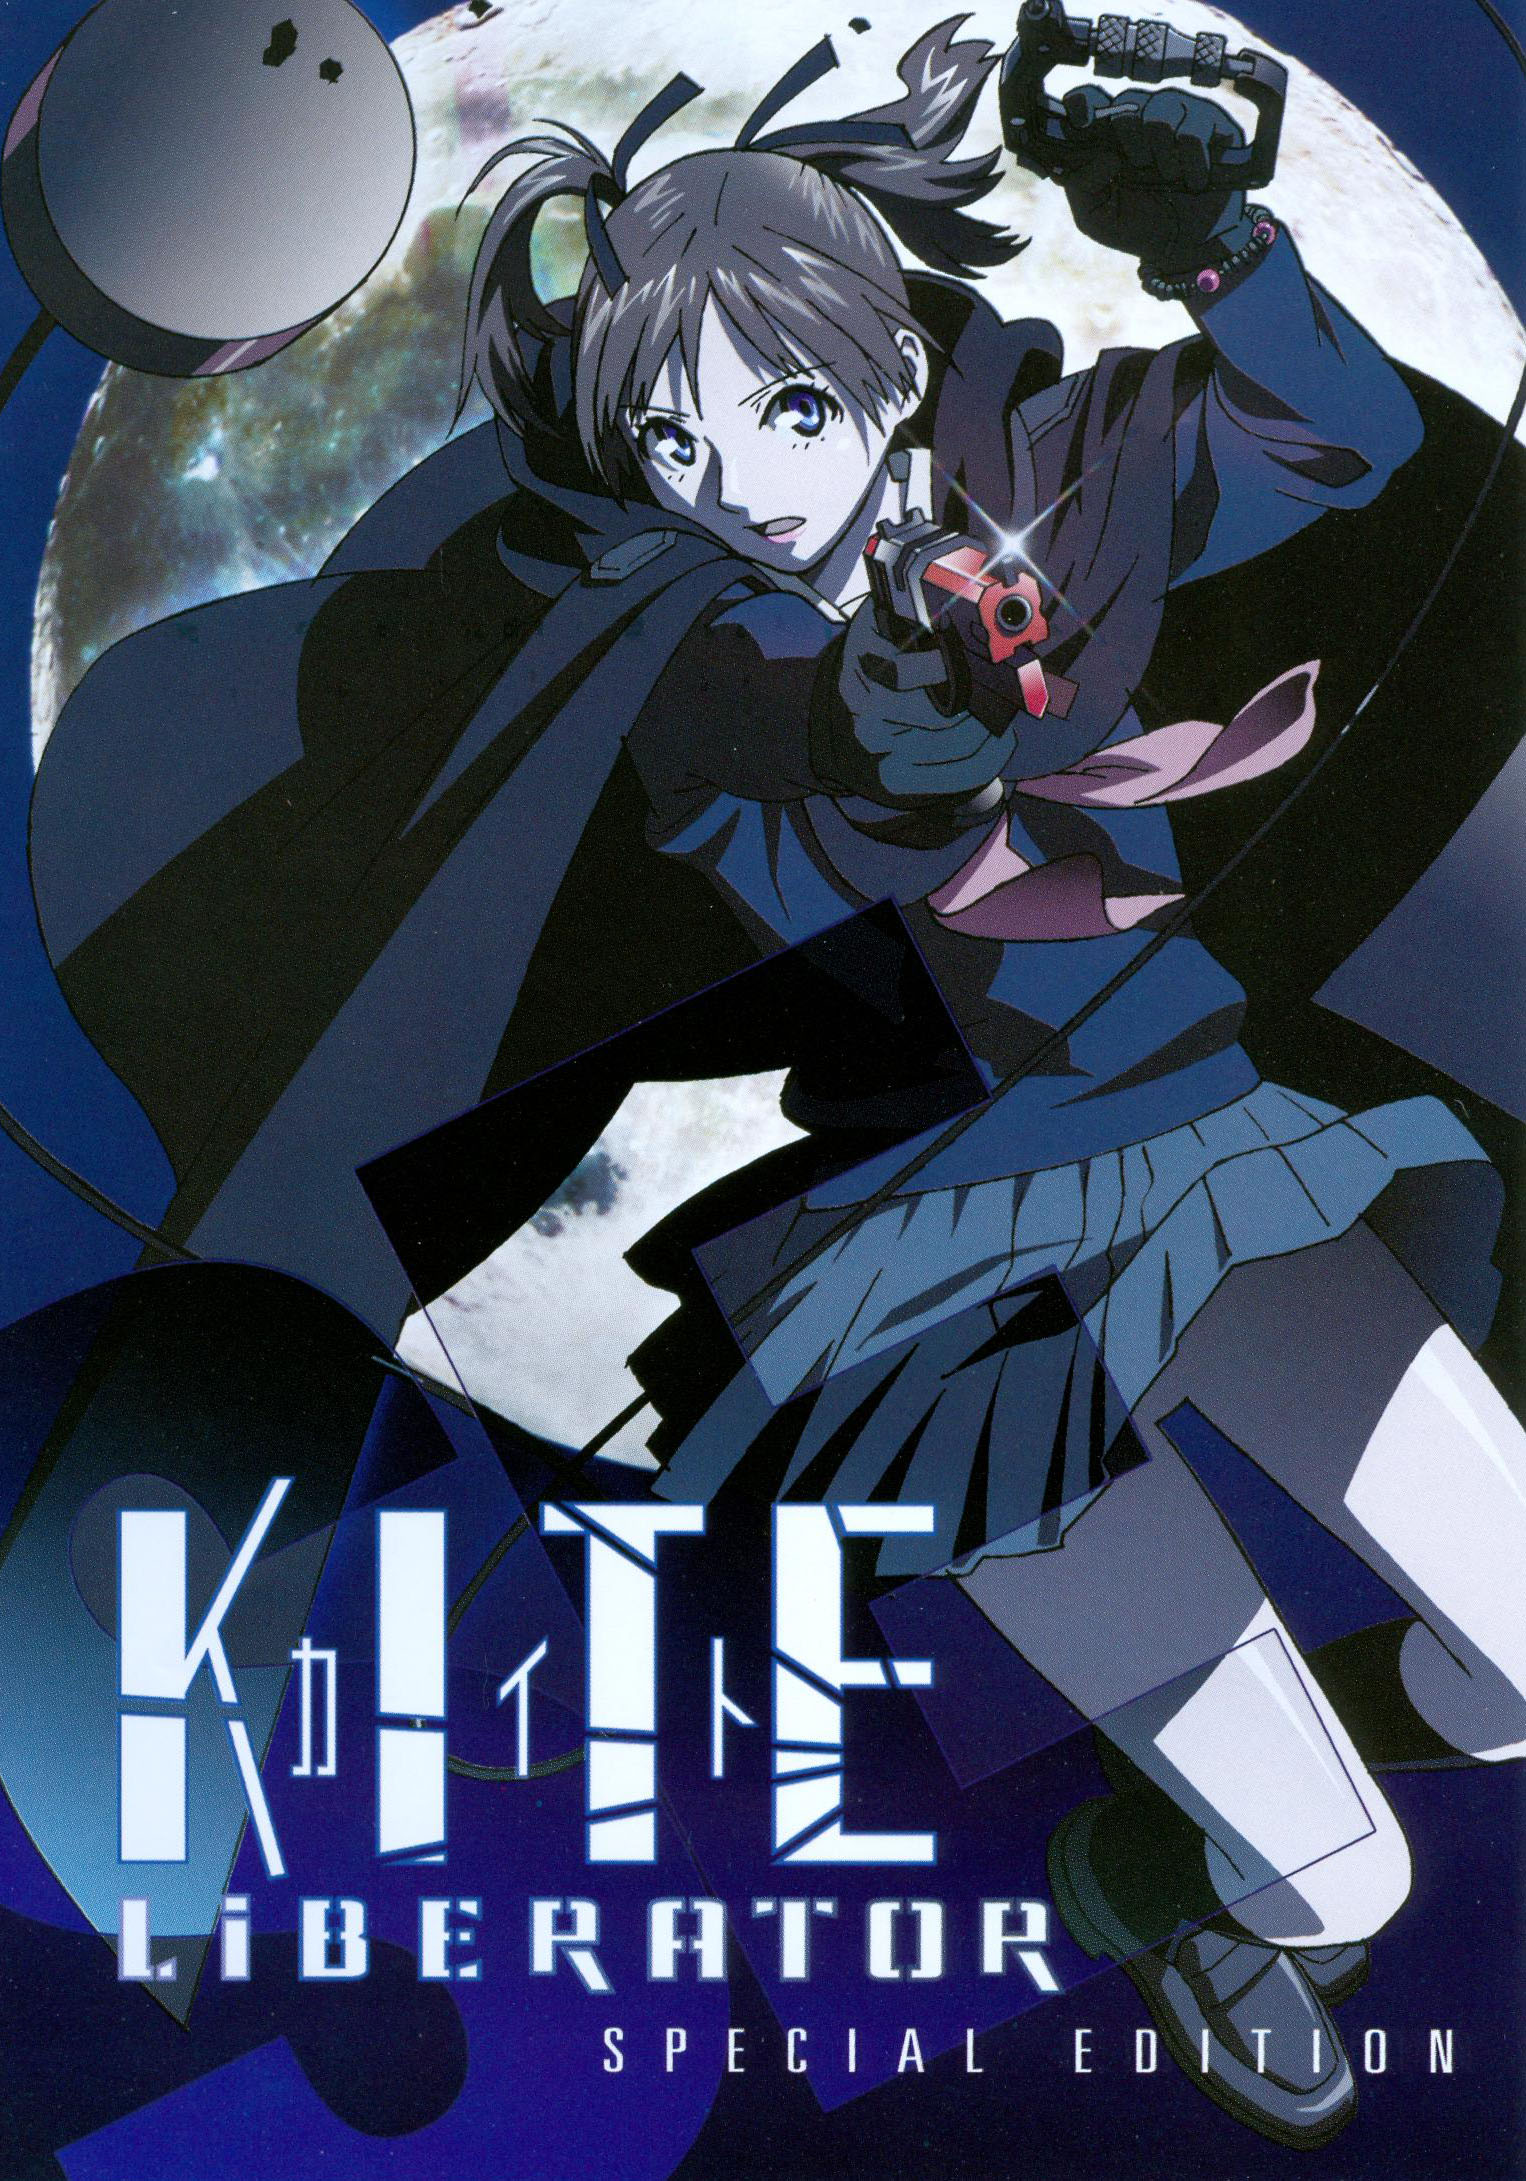 Best Buy: Kite Liberator [2 Discs] [Special Edition] [DVD] [2007]